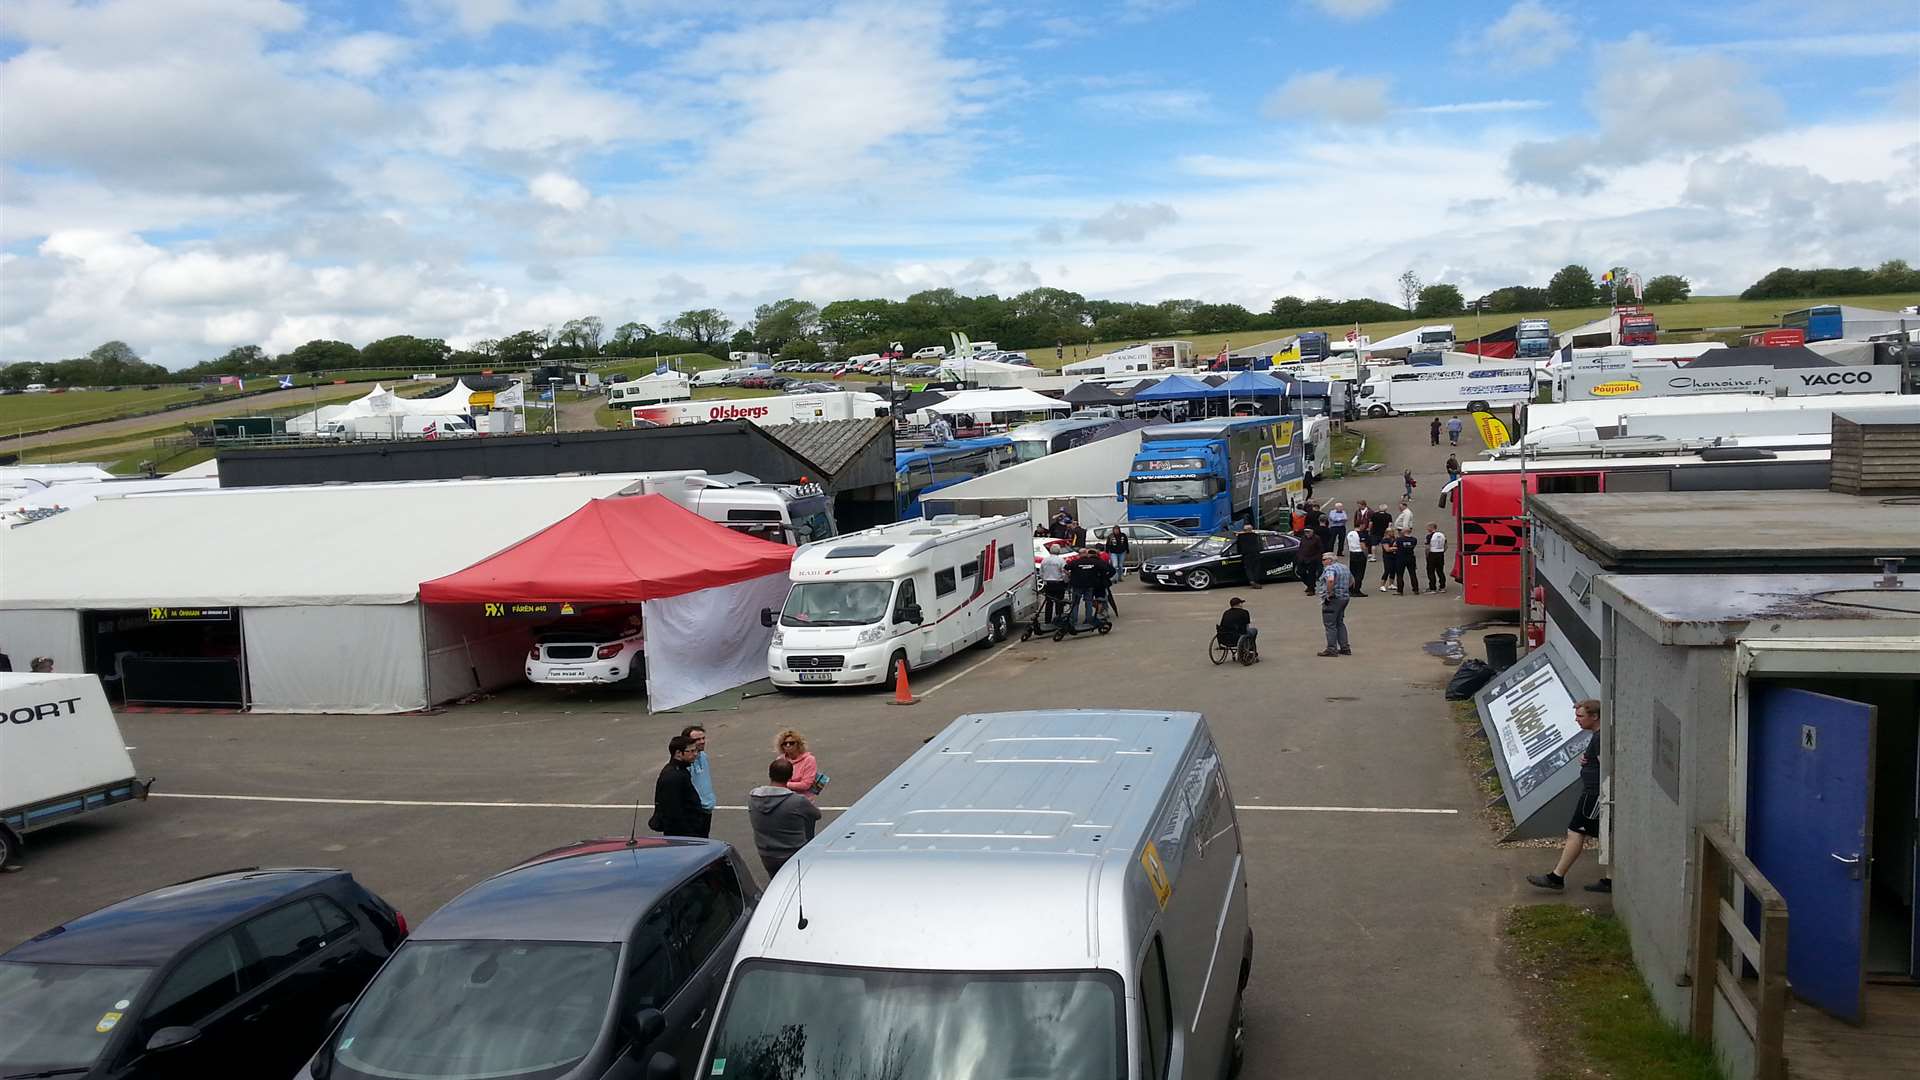 The Lydden paddock is packed for this weekend